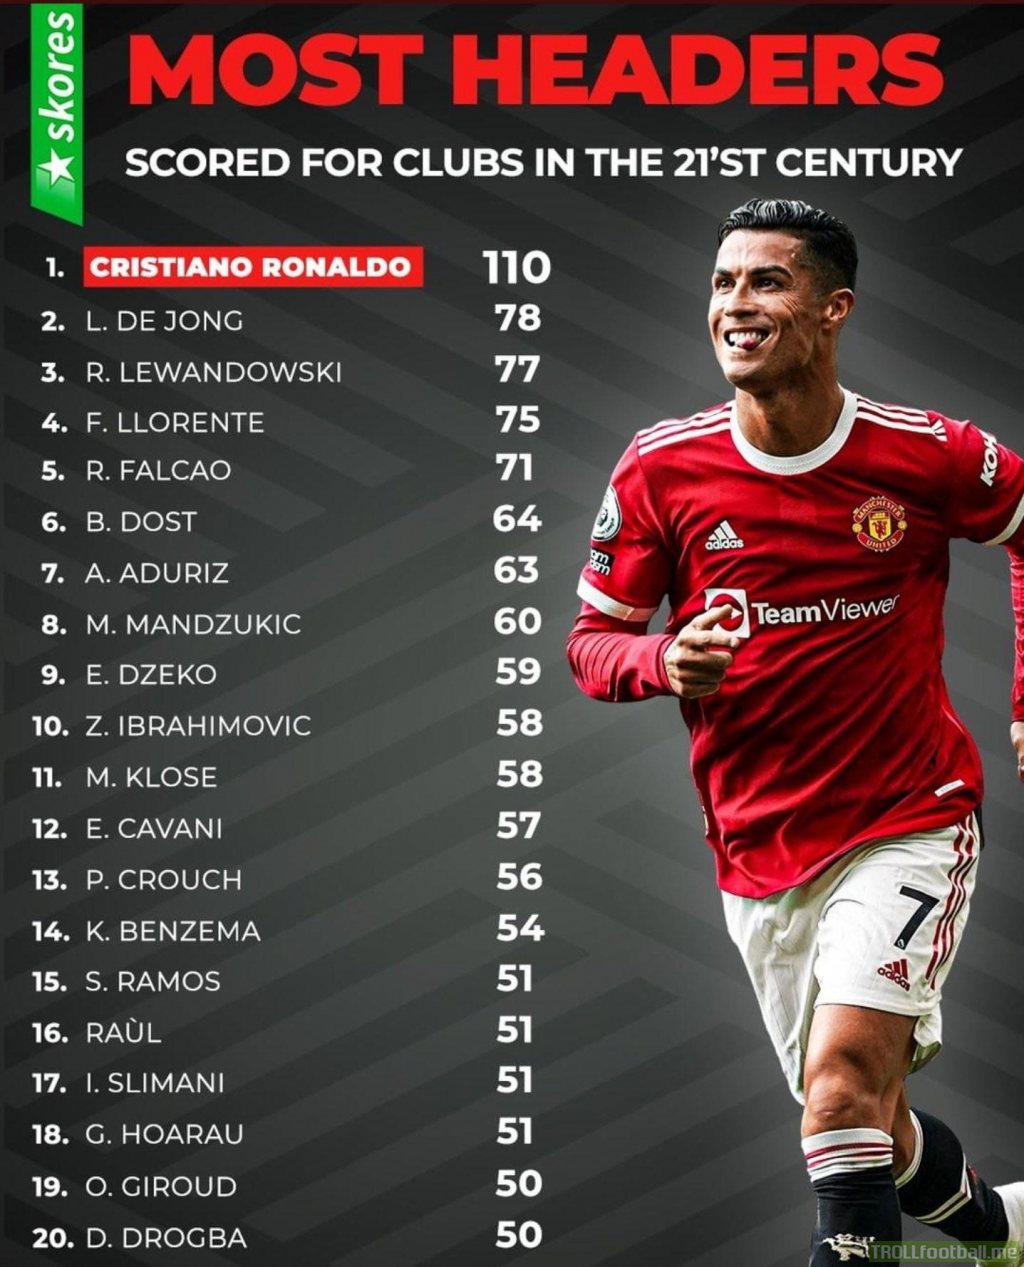 Most headers scored for clubs in 21st century